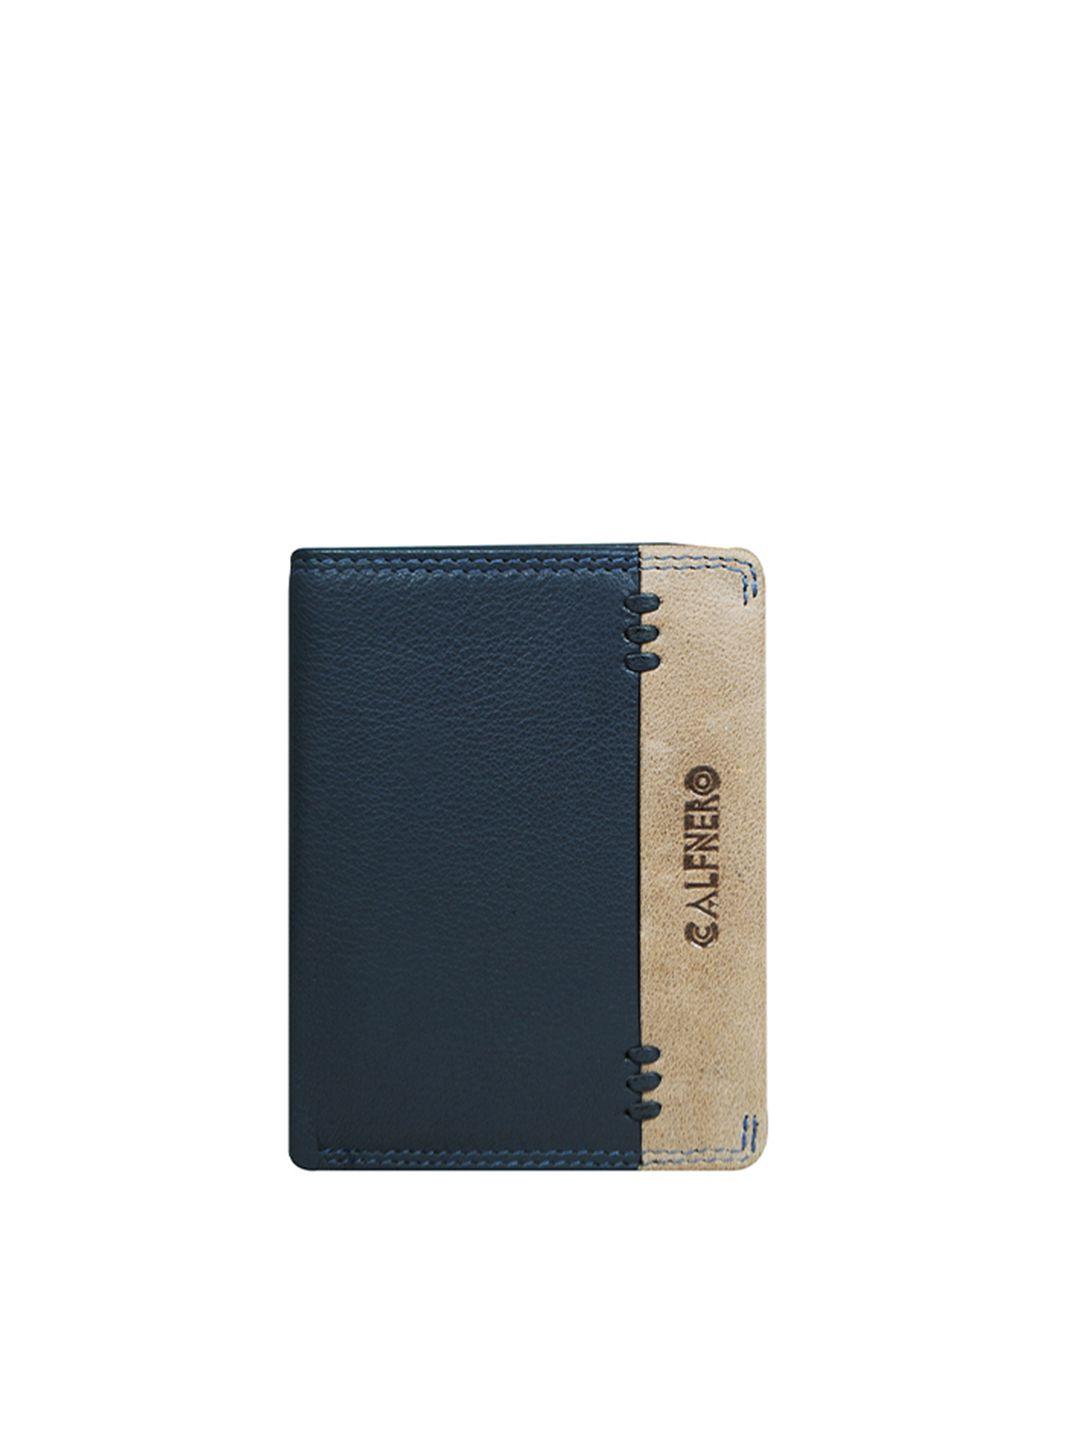 calfnero men blue & beige textured leather two fold wallet